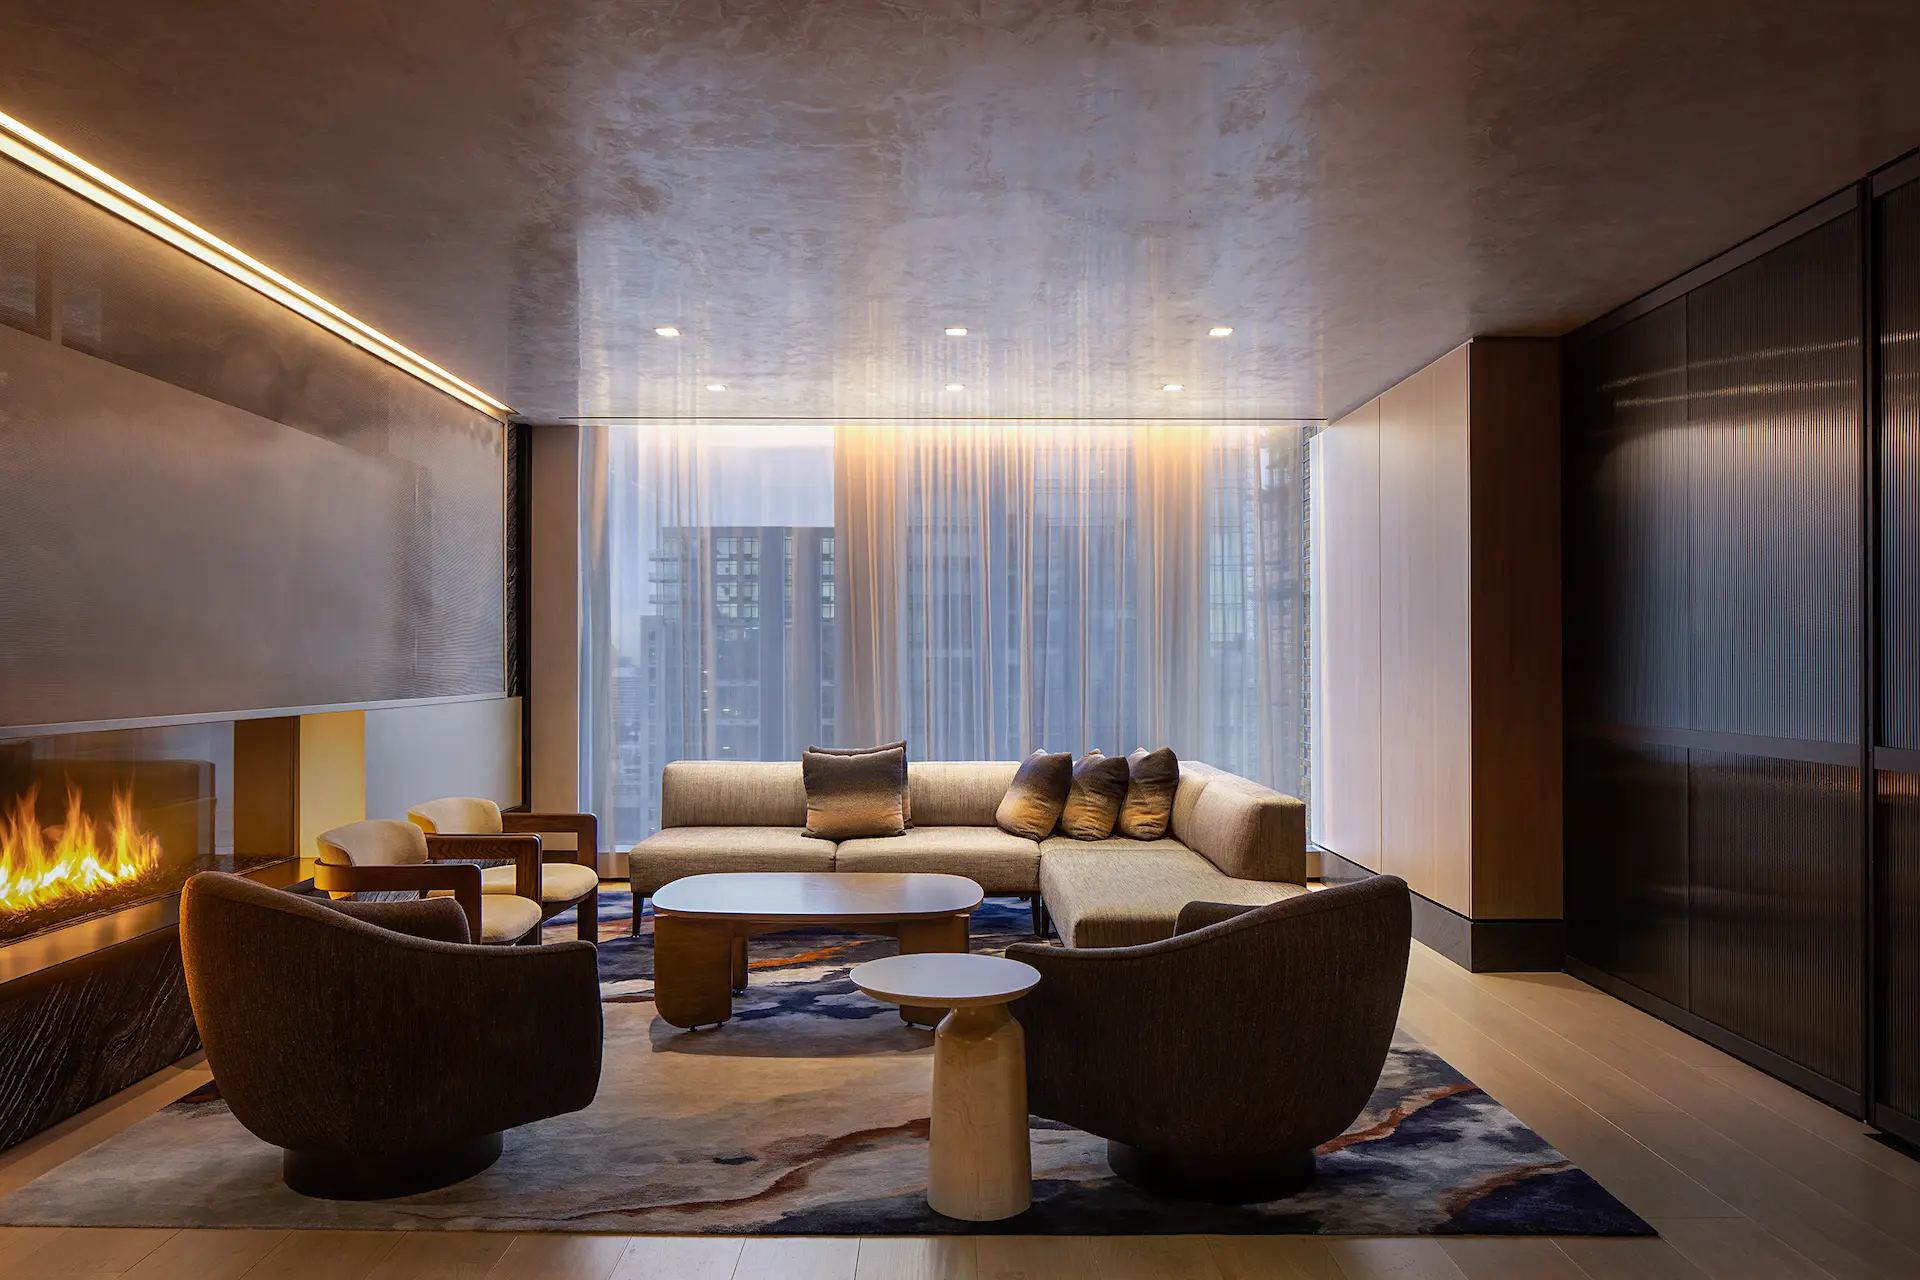 <Private lounge area with fireplace